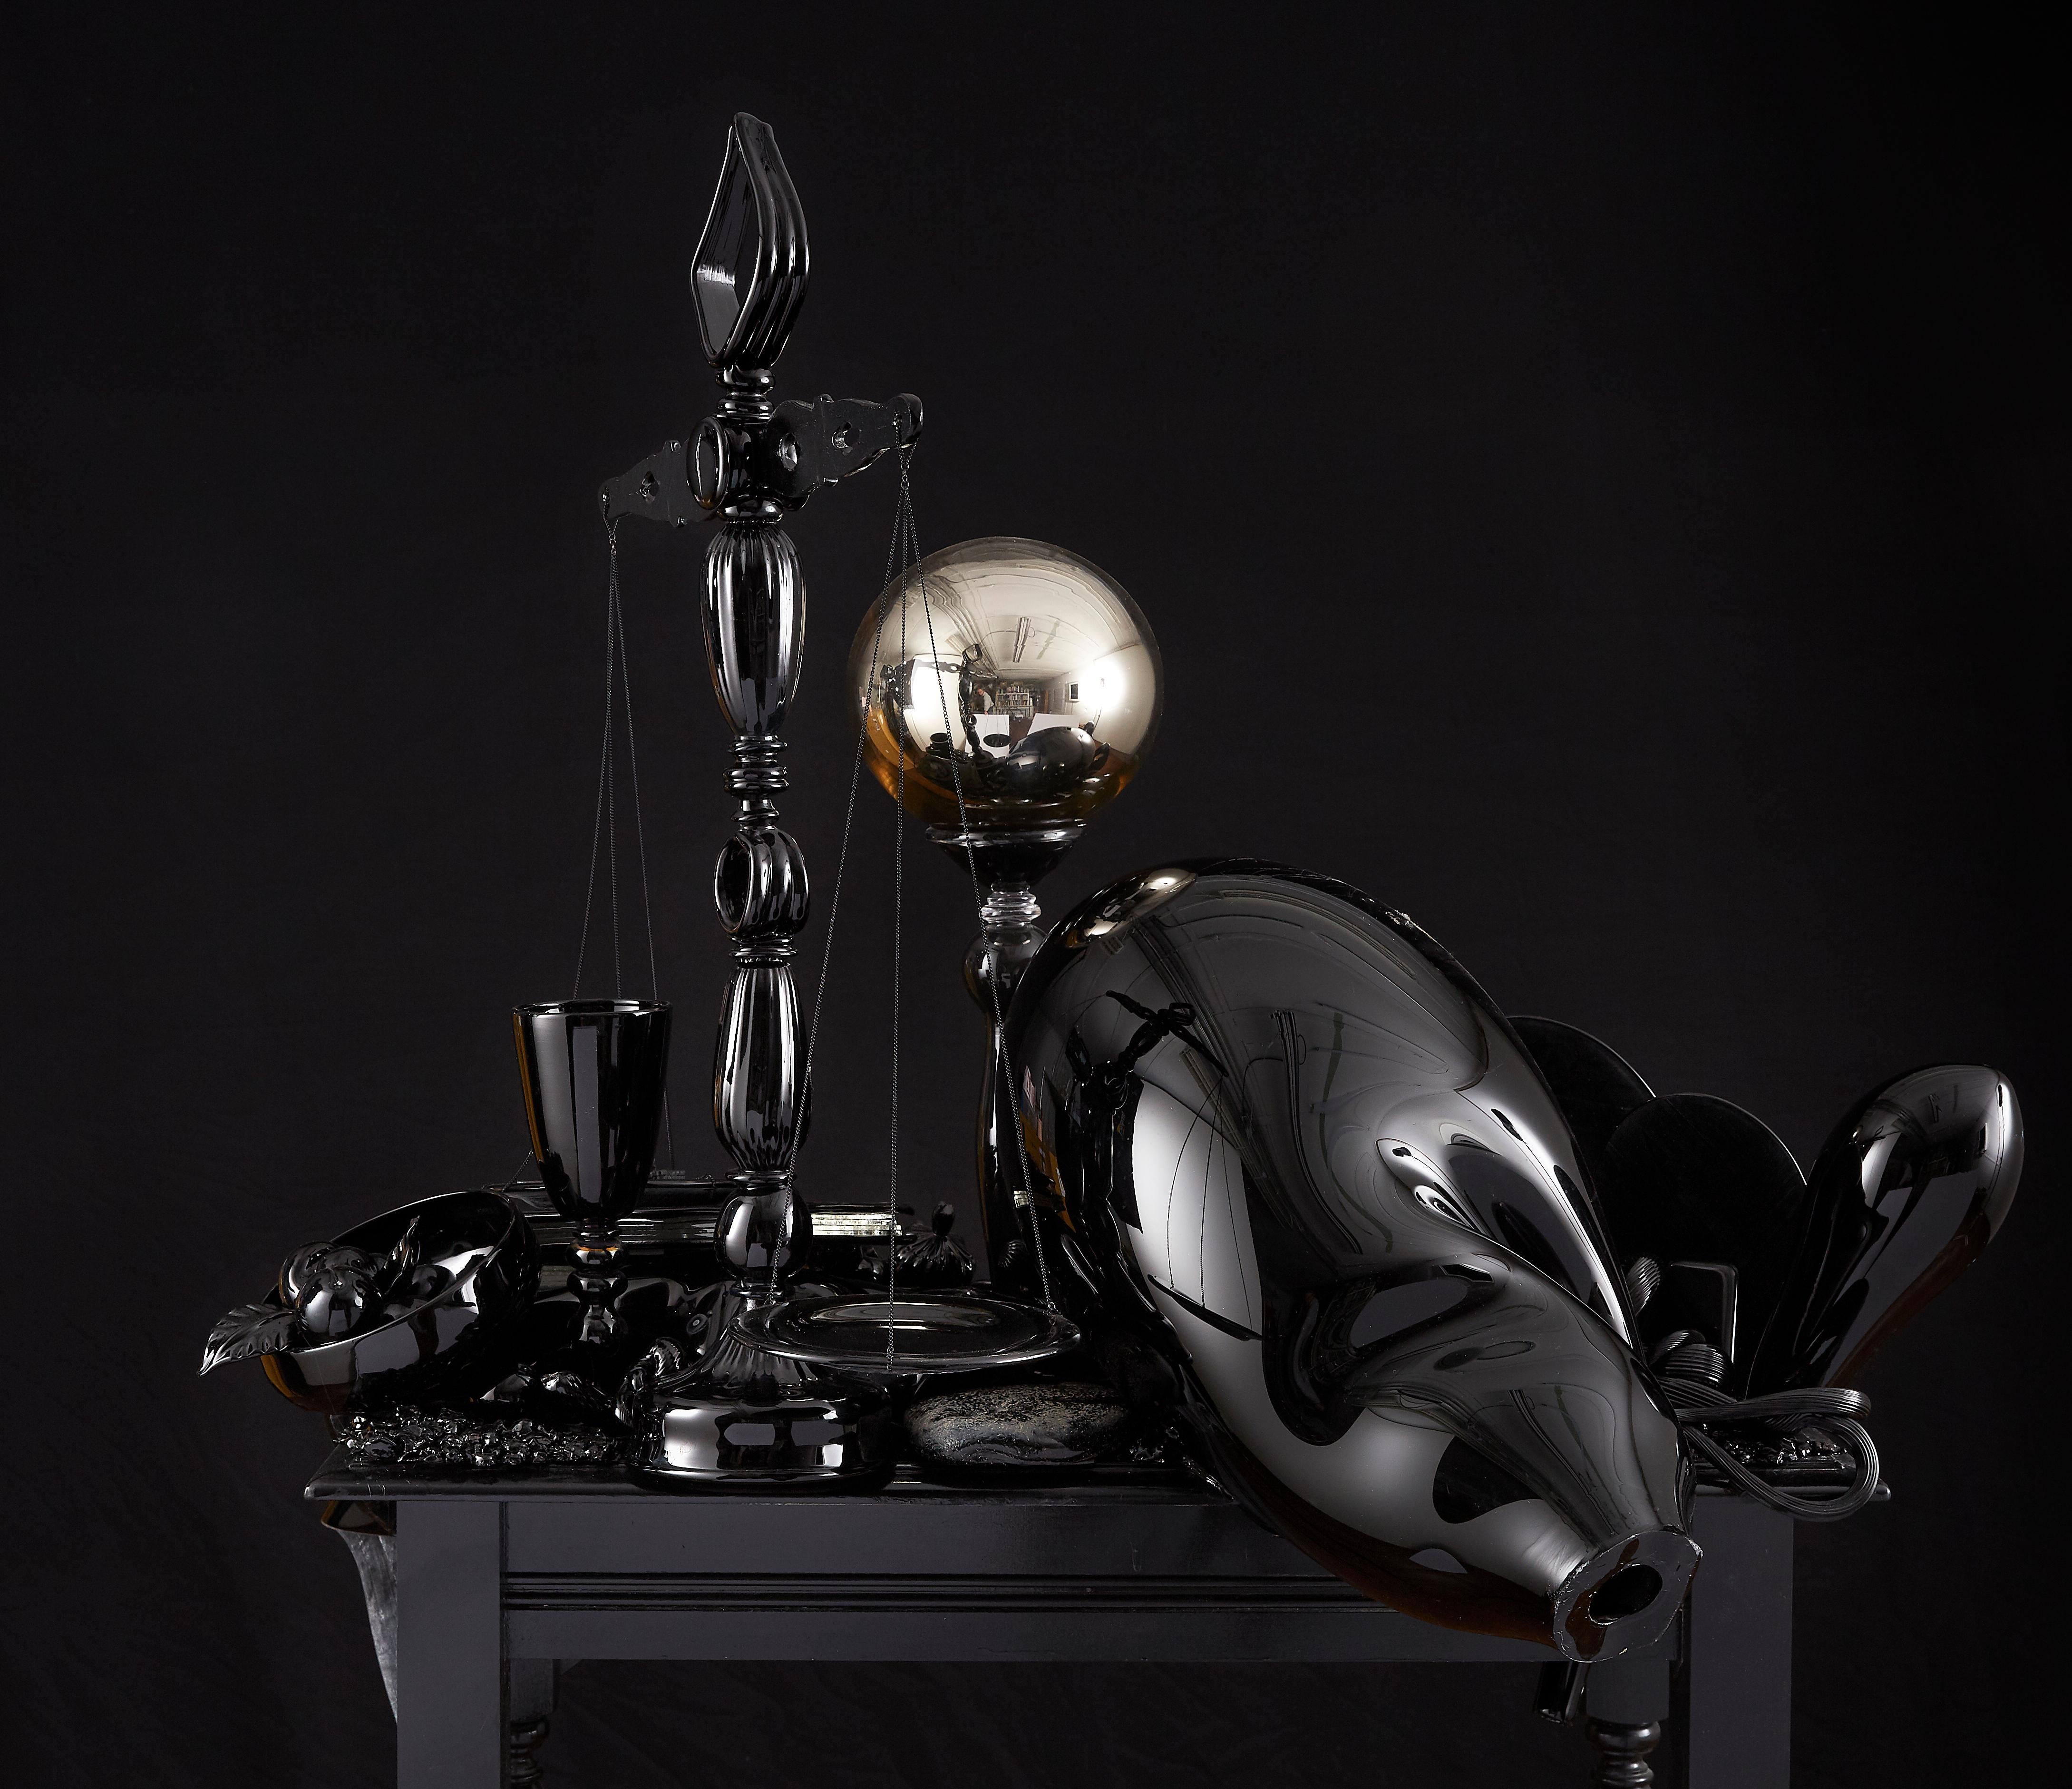 STILL-LIFE WITH SCALE AND GAZING BALL - Sculpture by Beth Lipman